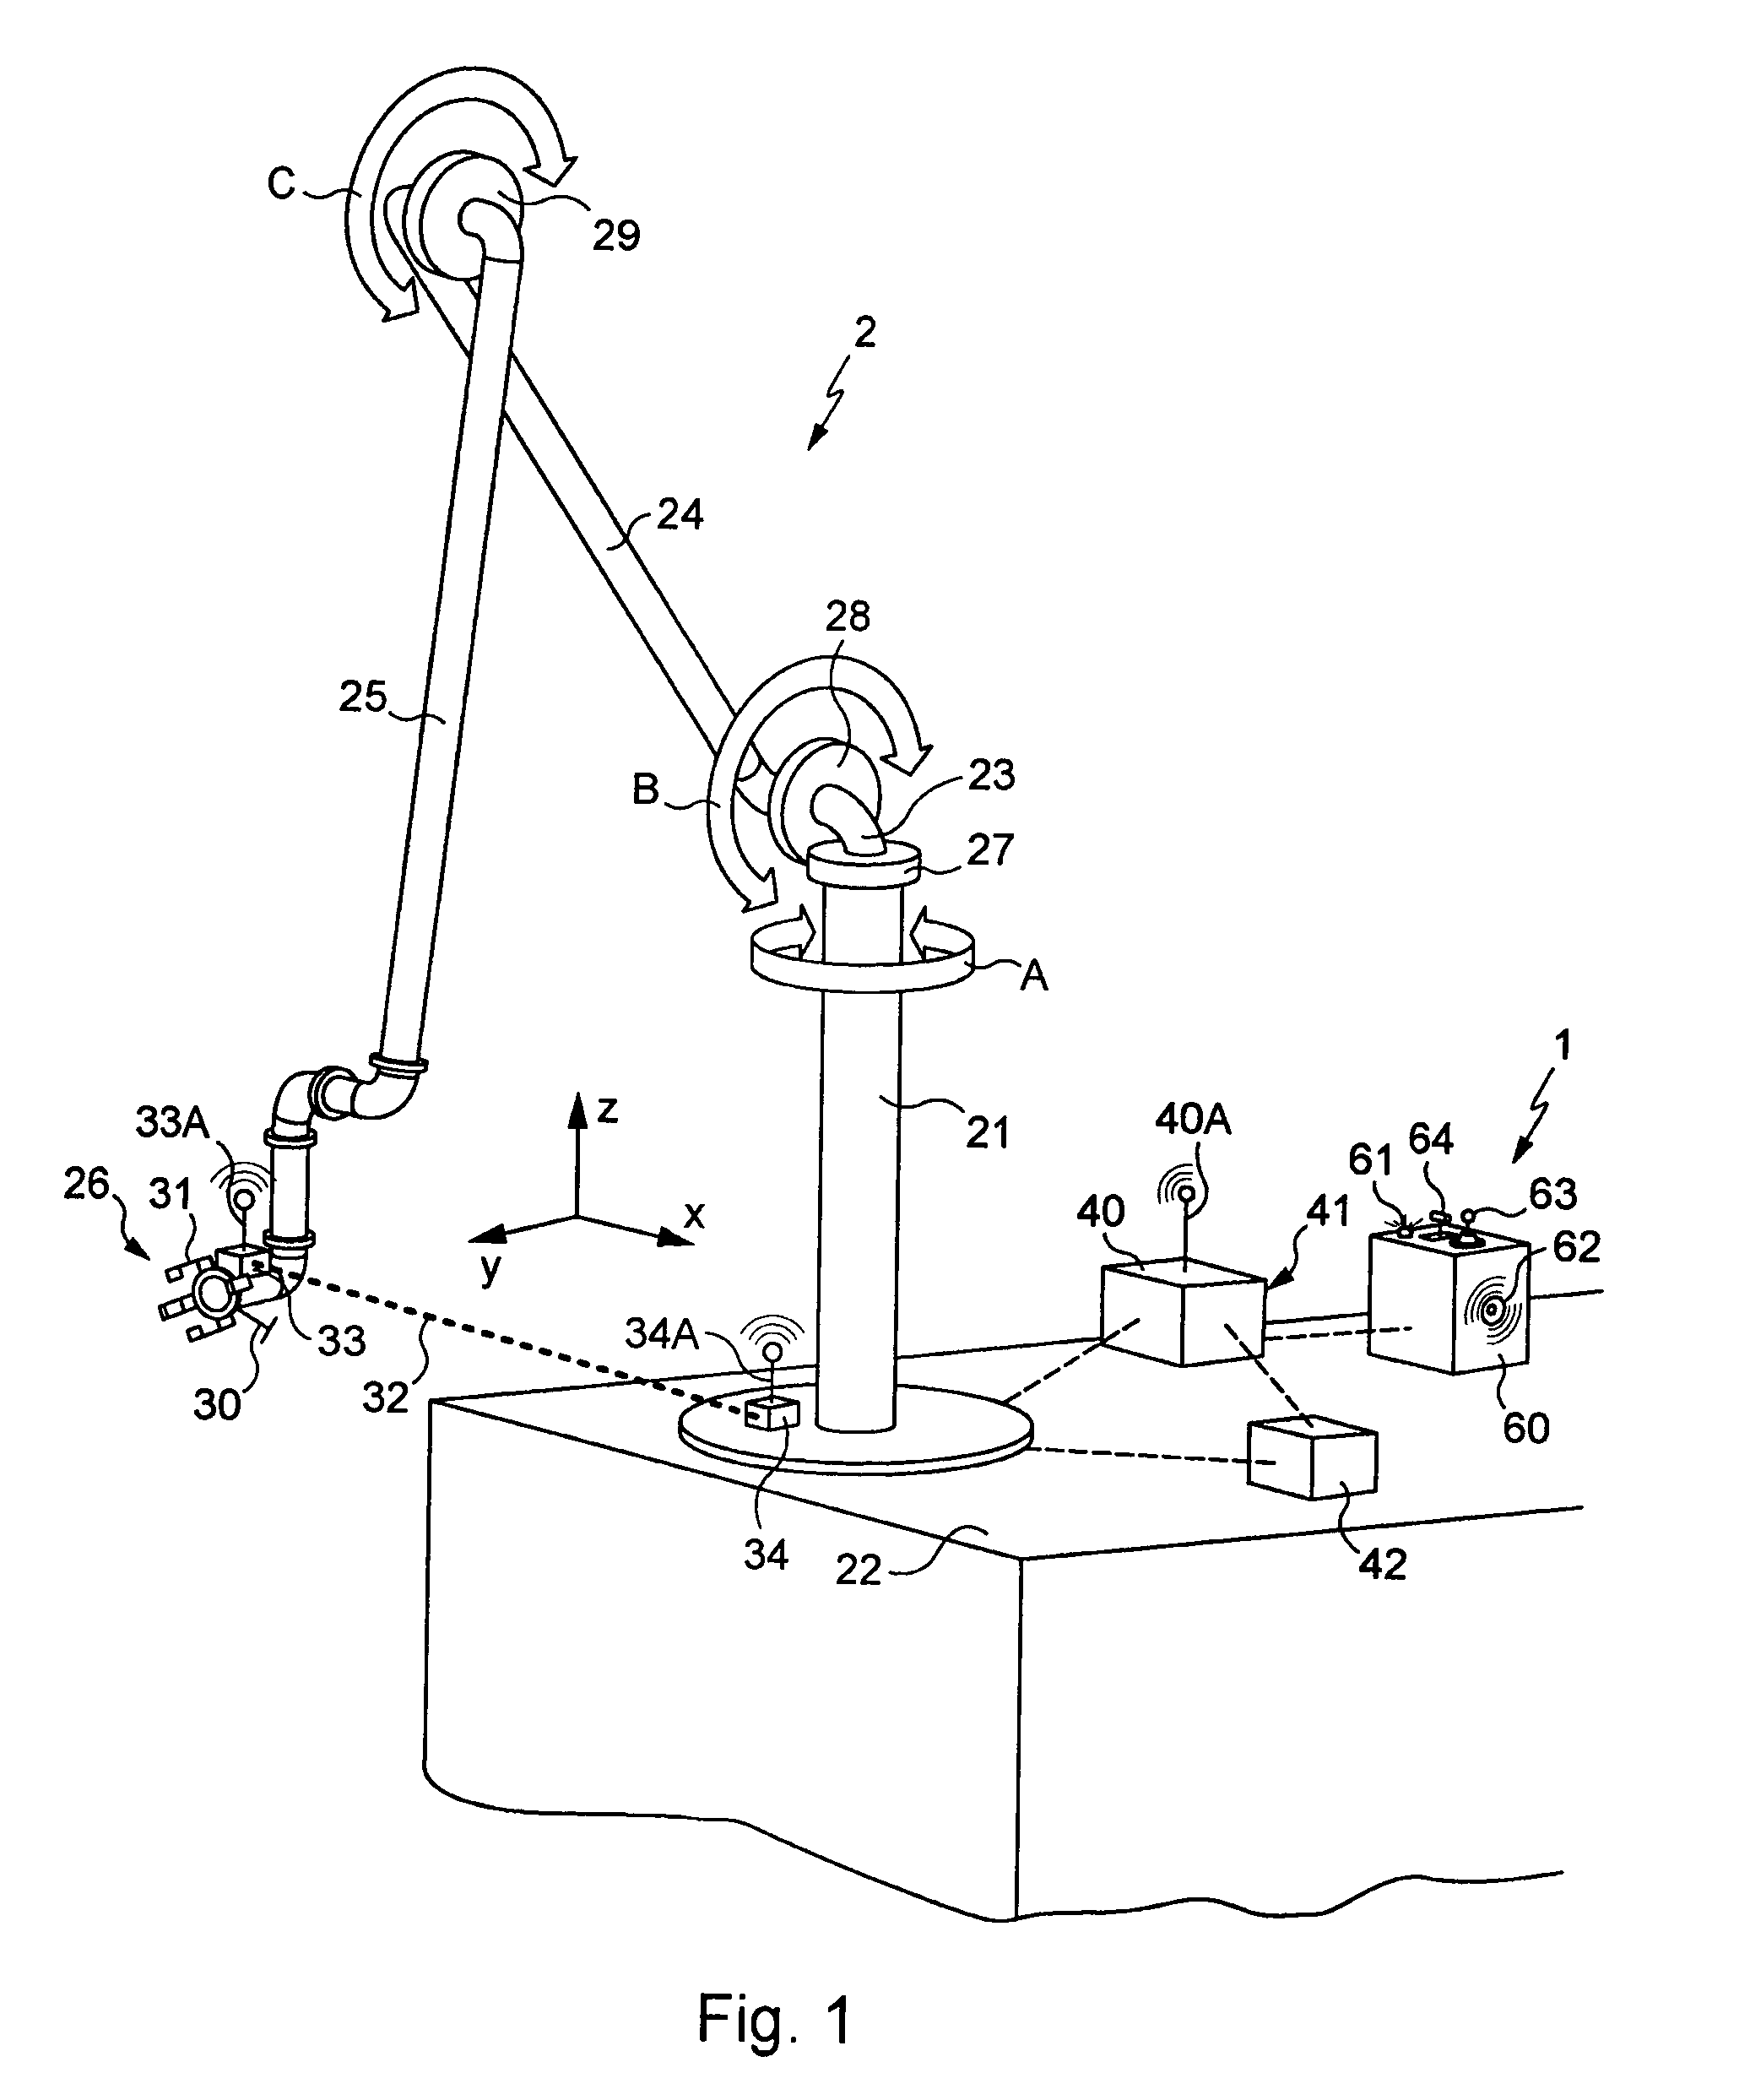 Device for providing information on positioning of a moveable coupling of a marine fluid loading system